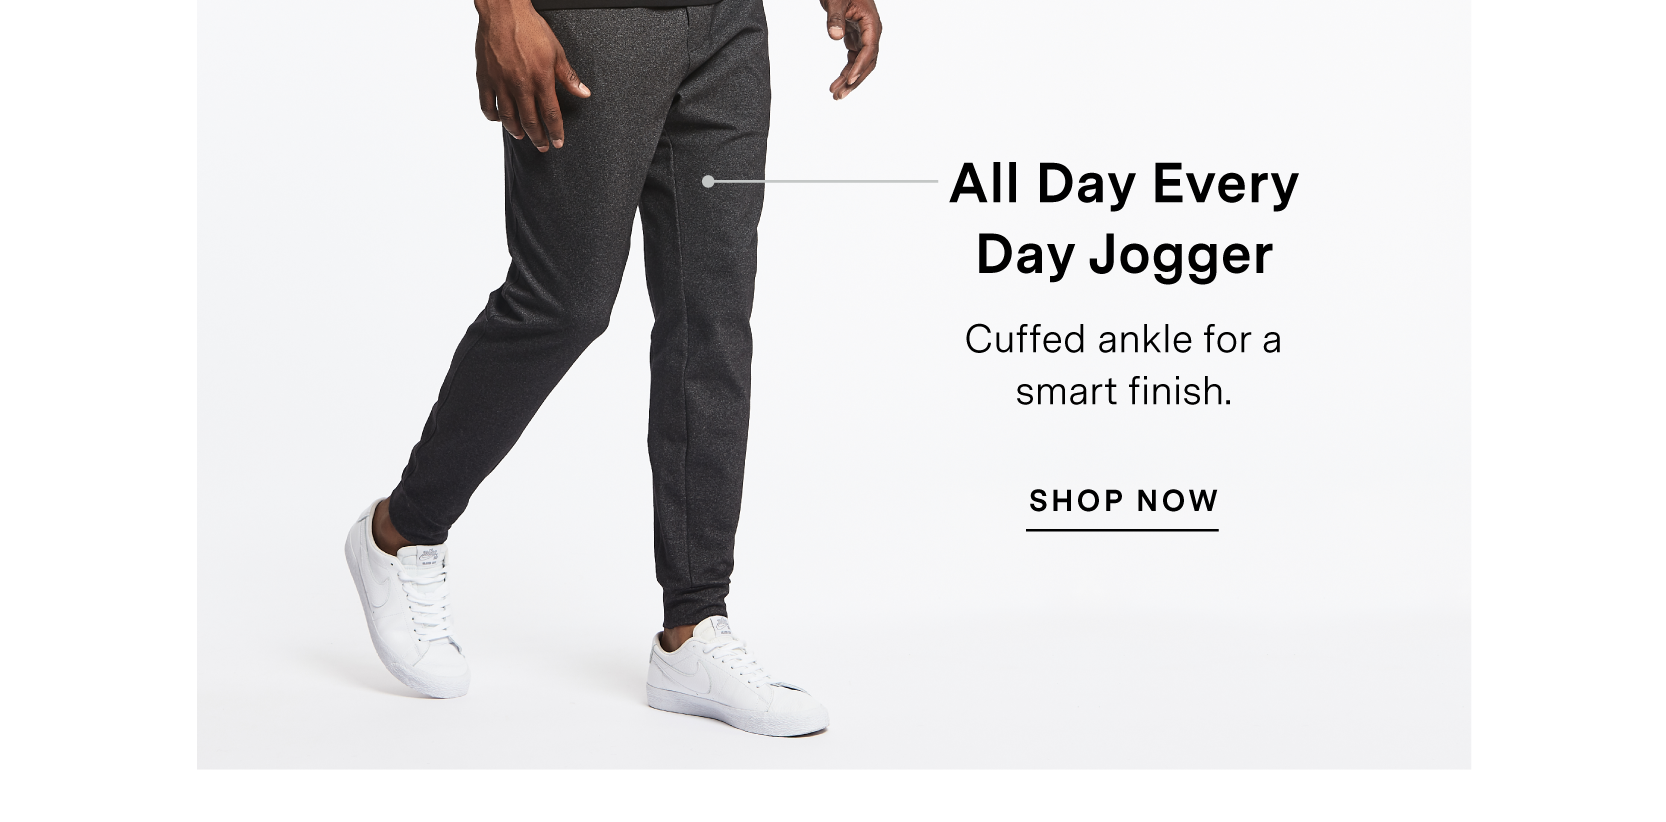 All Day Every Day Jogger. SHOP NOW